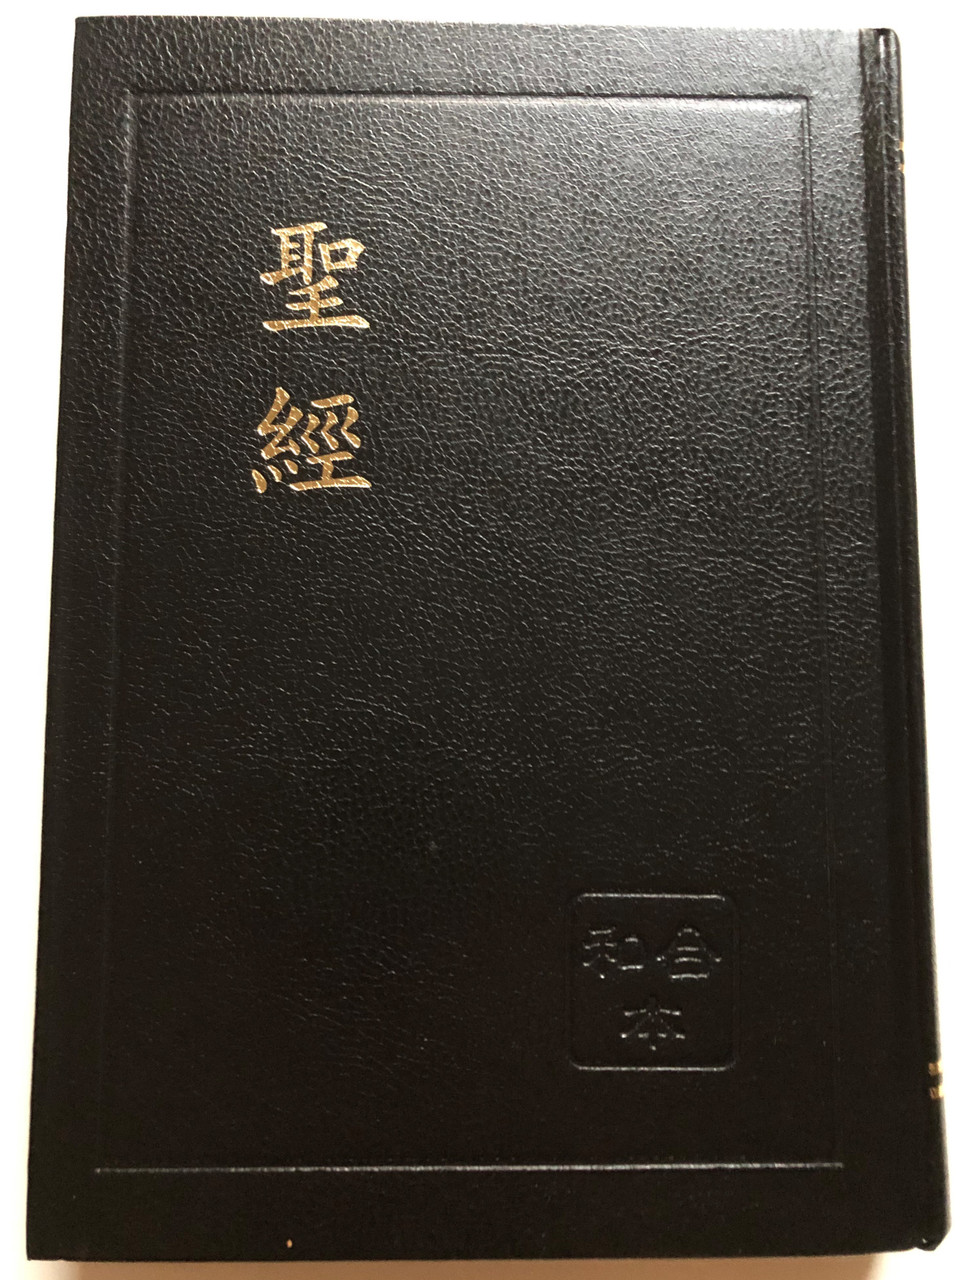 https://cdn10.bigcommerce.com/s-62bdpkt7pb/products/50660/images/258378/Chinese_Shen_Edition_Holy_Bible_1__59928.1668177201.1280.1280.JPG?c=2